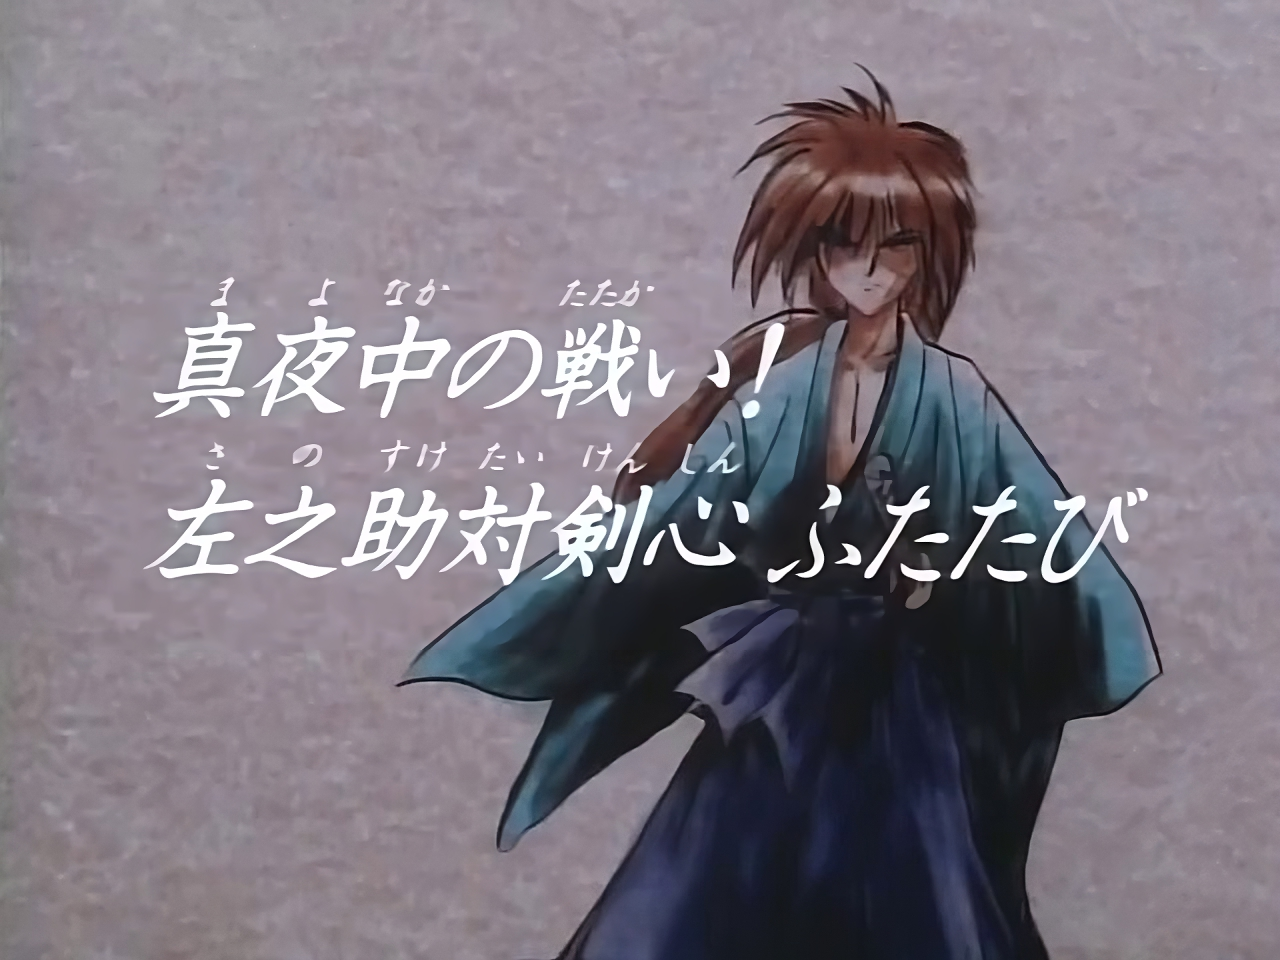 Rurouni Kenshin Episode 21 Likely to Continue Revisiting Kenshin's